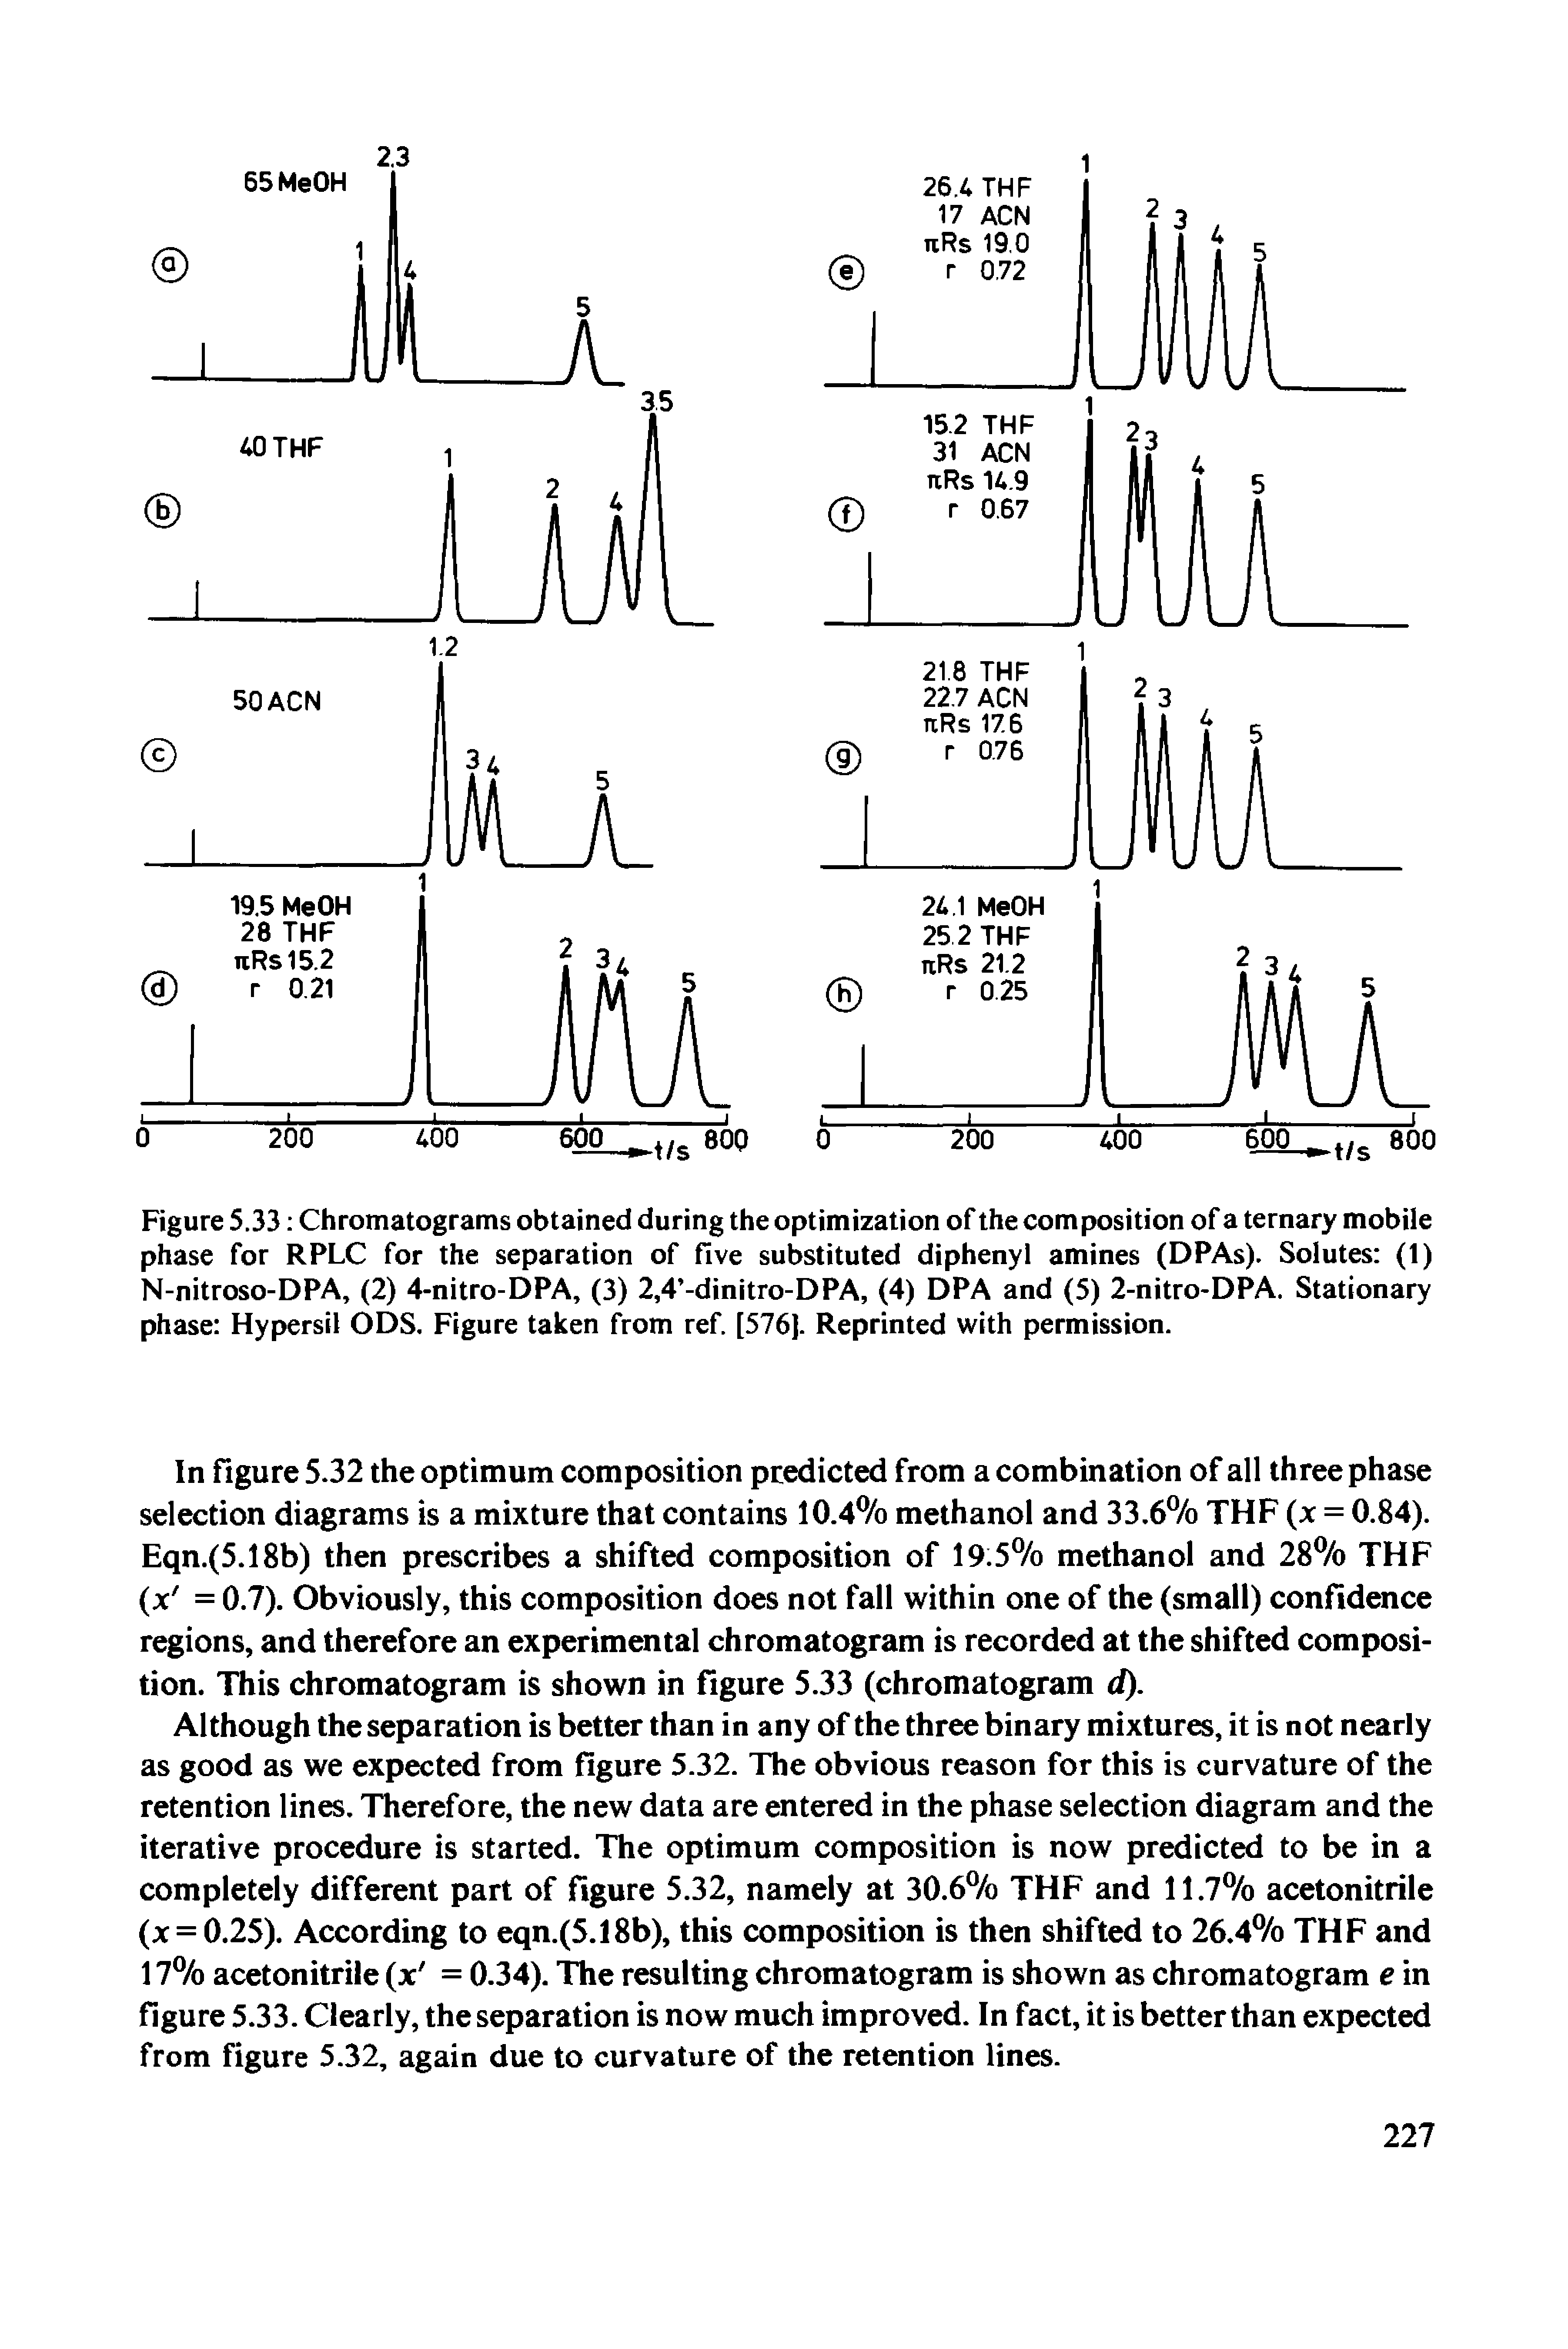 Figure 5.33 Chromatograms obtained during the optimization of the composition of a ternary mobile phase for RPLC for the separation of five substituted diphenyl amines (DPAs). Solutes (1) N-nitroso-DPA, (2) 4-nitro-DPA, (3) 2,4 -dinitro-DPA, (4) DPA and (5) 2-nitro-DPA. Stationary phase Hypersil ODS. Figure taken from ref. [576]. Reprinted with permission.